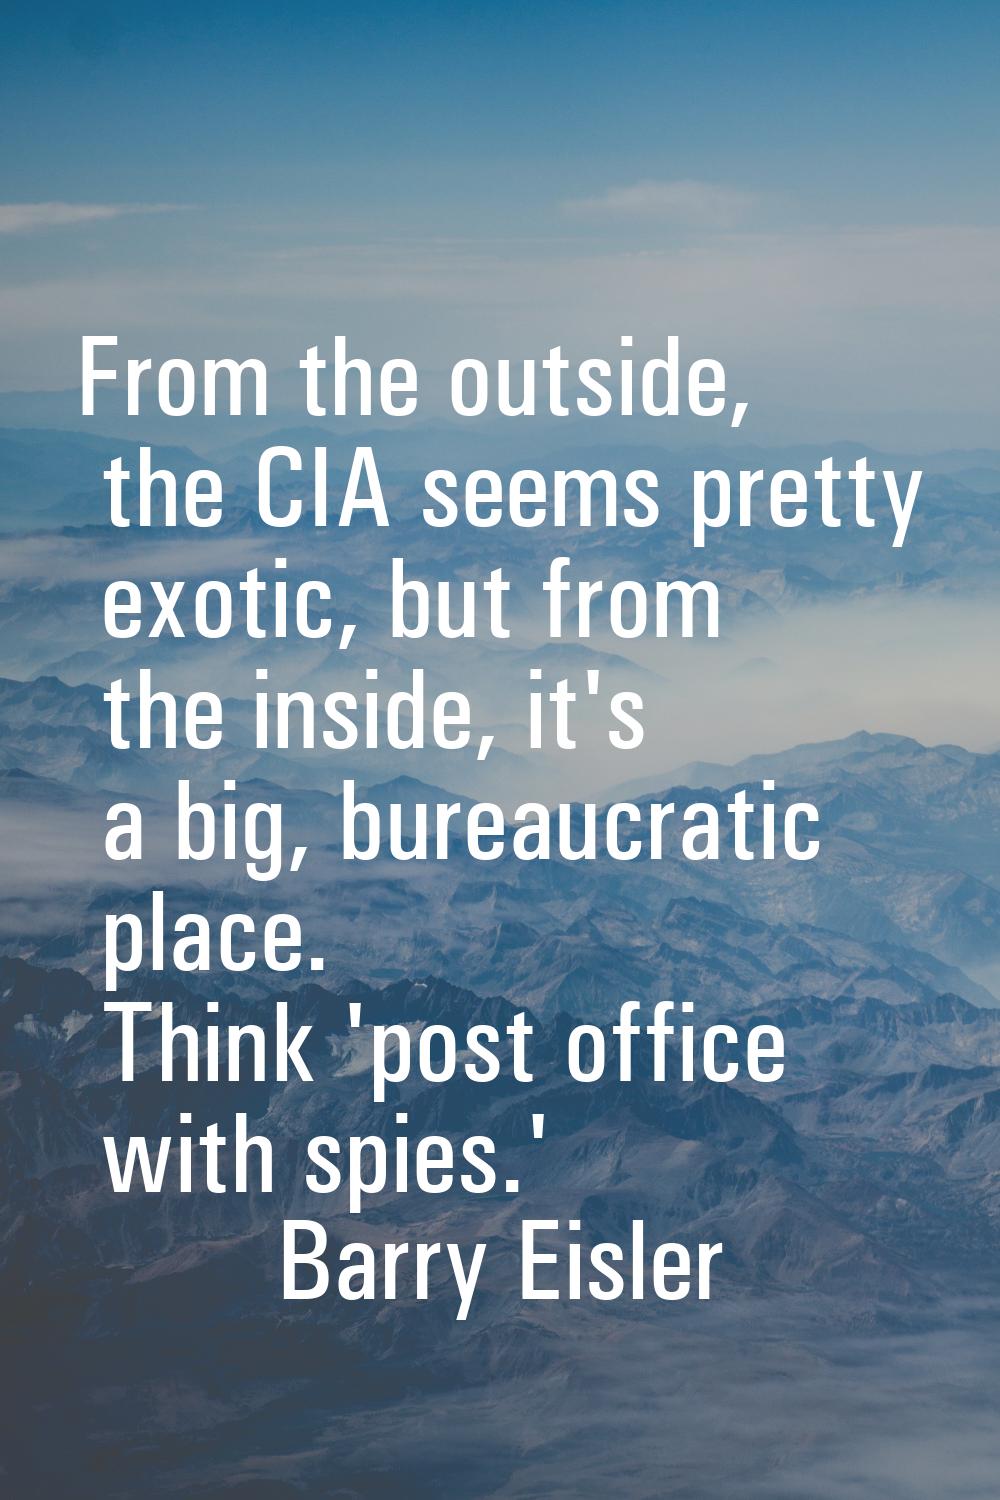 From the outside, the CIA seems pretty exotic, but from the inside, it's a big, bureaucratic place.